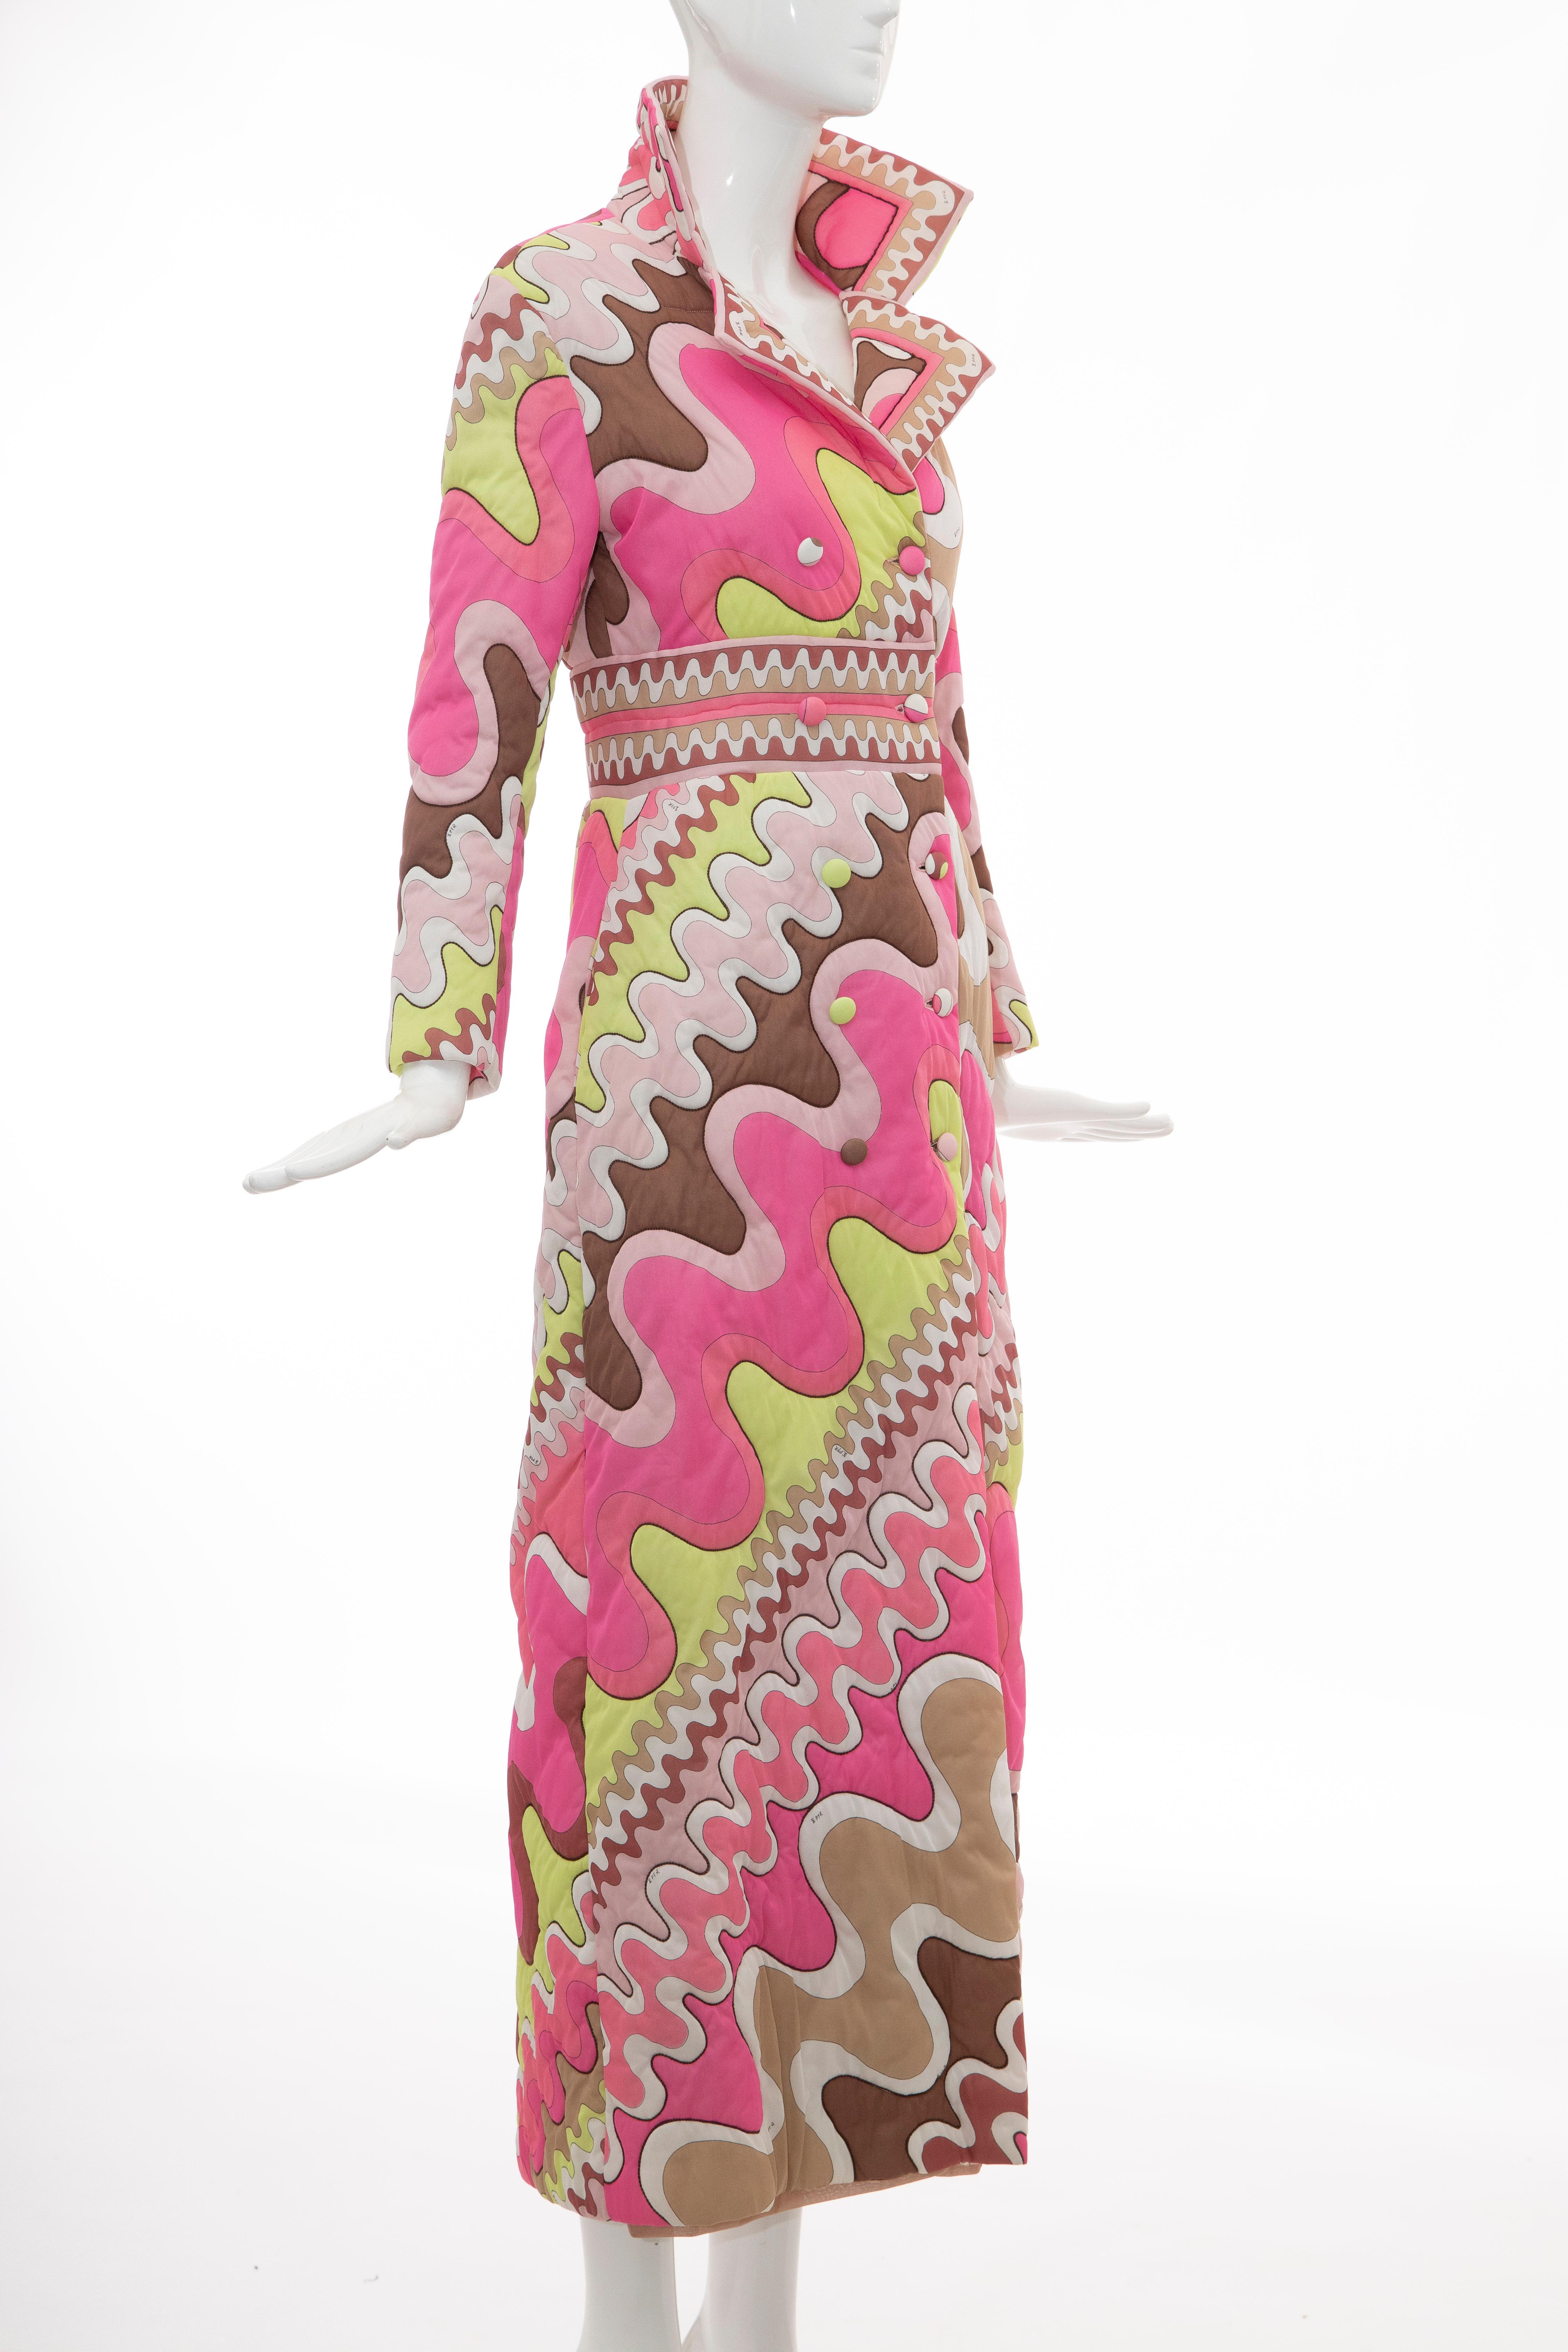 Emilio Pucci Double-Breasted Abstract Print Quilted Coat, Circa: 1970's im Zustand „Hervorragend“ in Cincinnati, OH